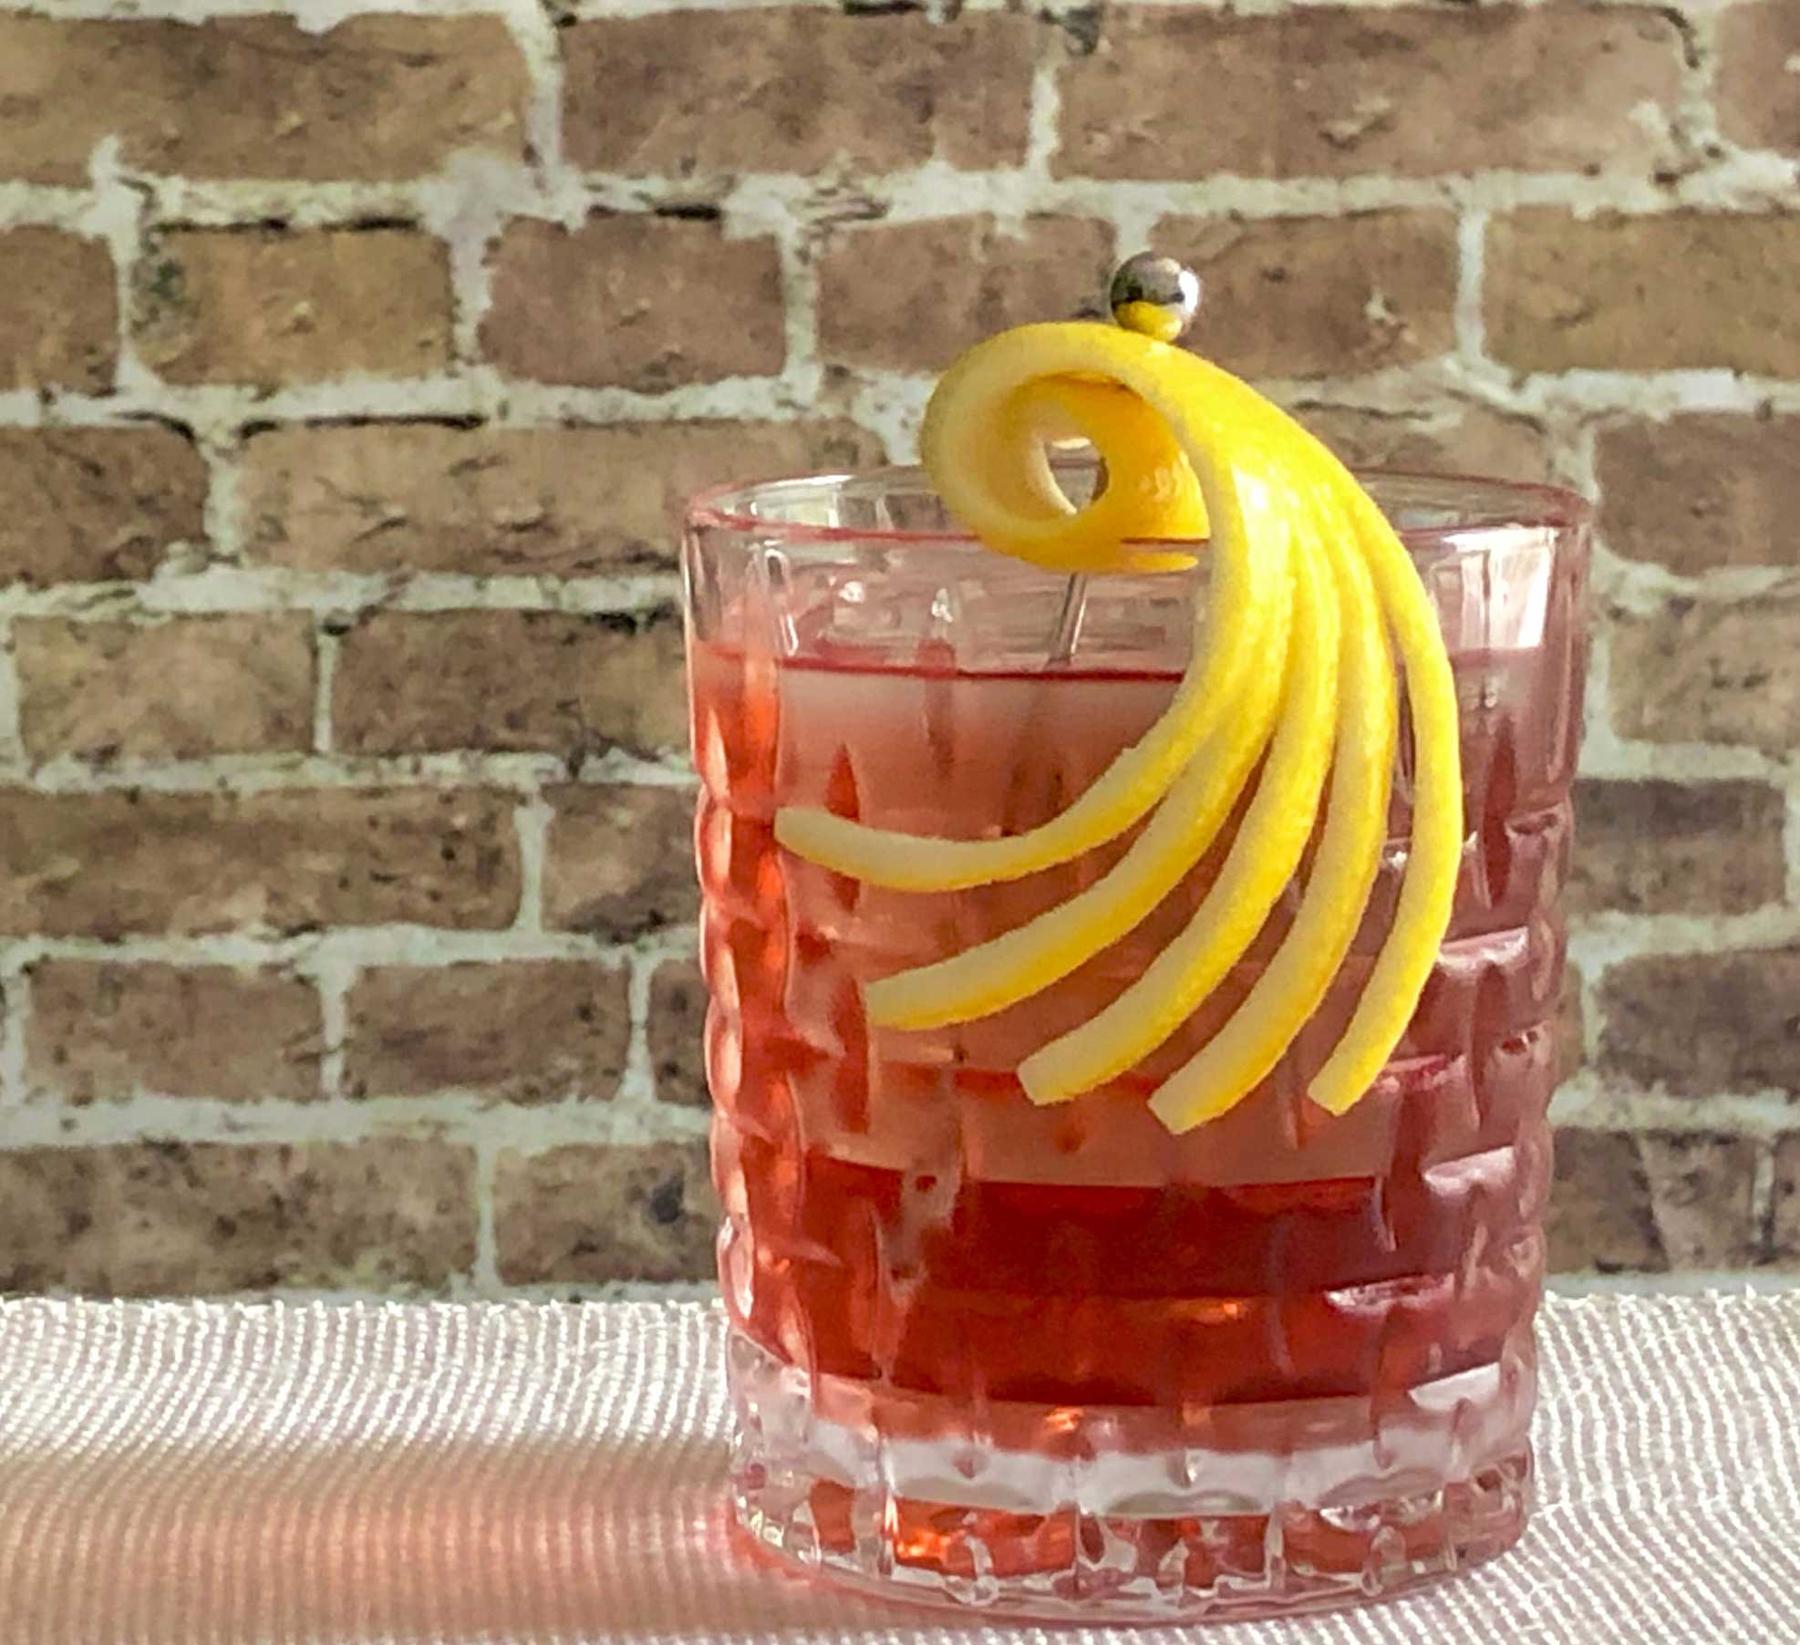 An example of the Hidden Roots, the mixed drink (drink) featuring bourbon whiskey, Cocchi Americano Rosa, and lemon twist; photo by Lee Edwards